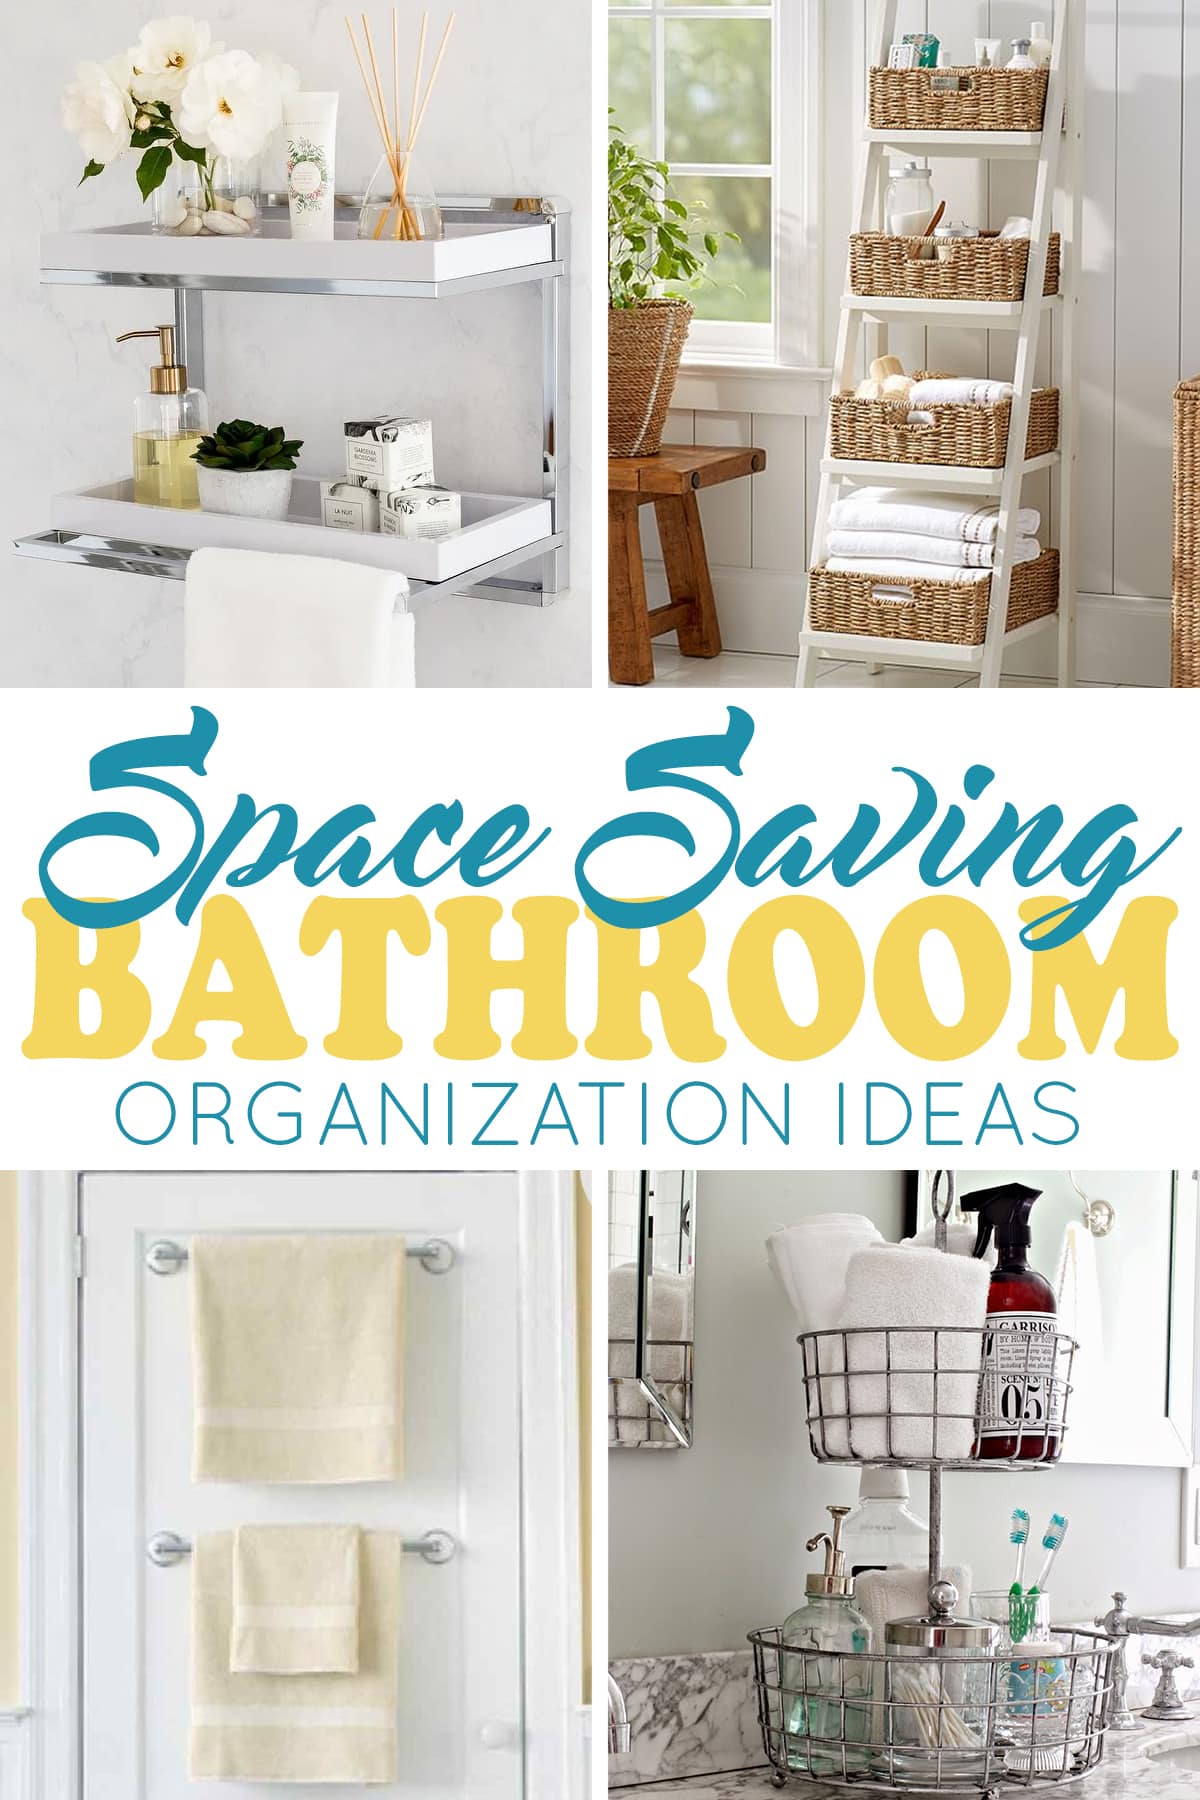 Collage of bathroom organization including shelves on wall, towel bars on a door, a tray on the counter, and a ladder shelf filled with baskets.